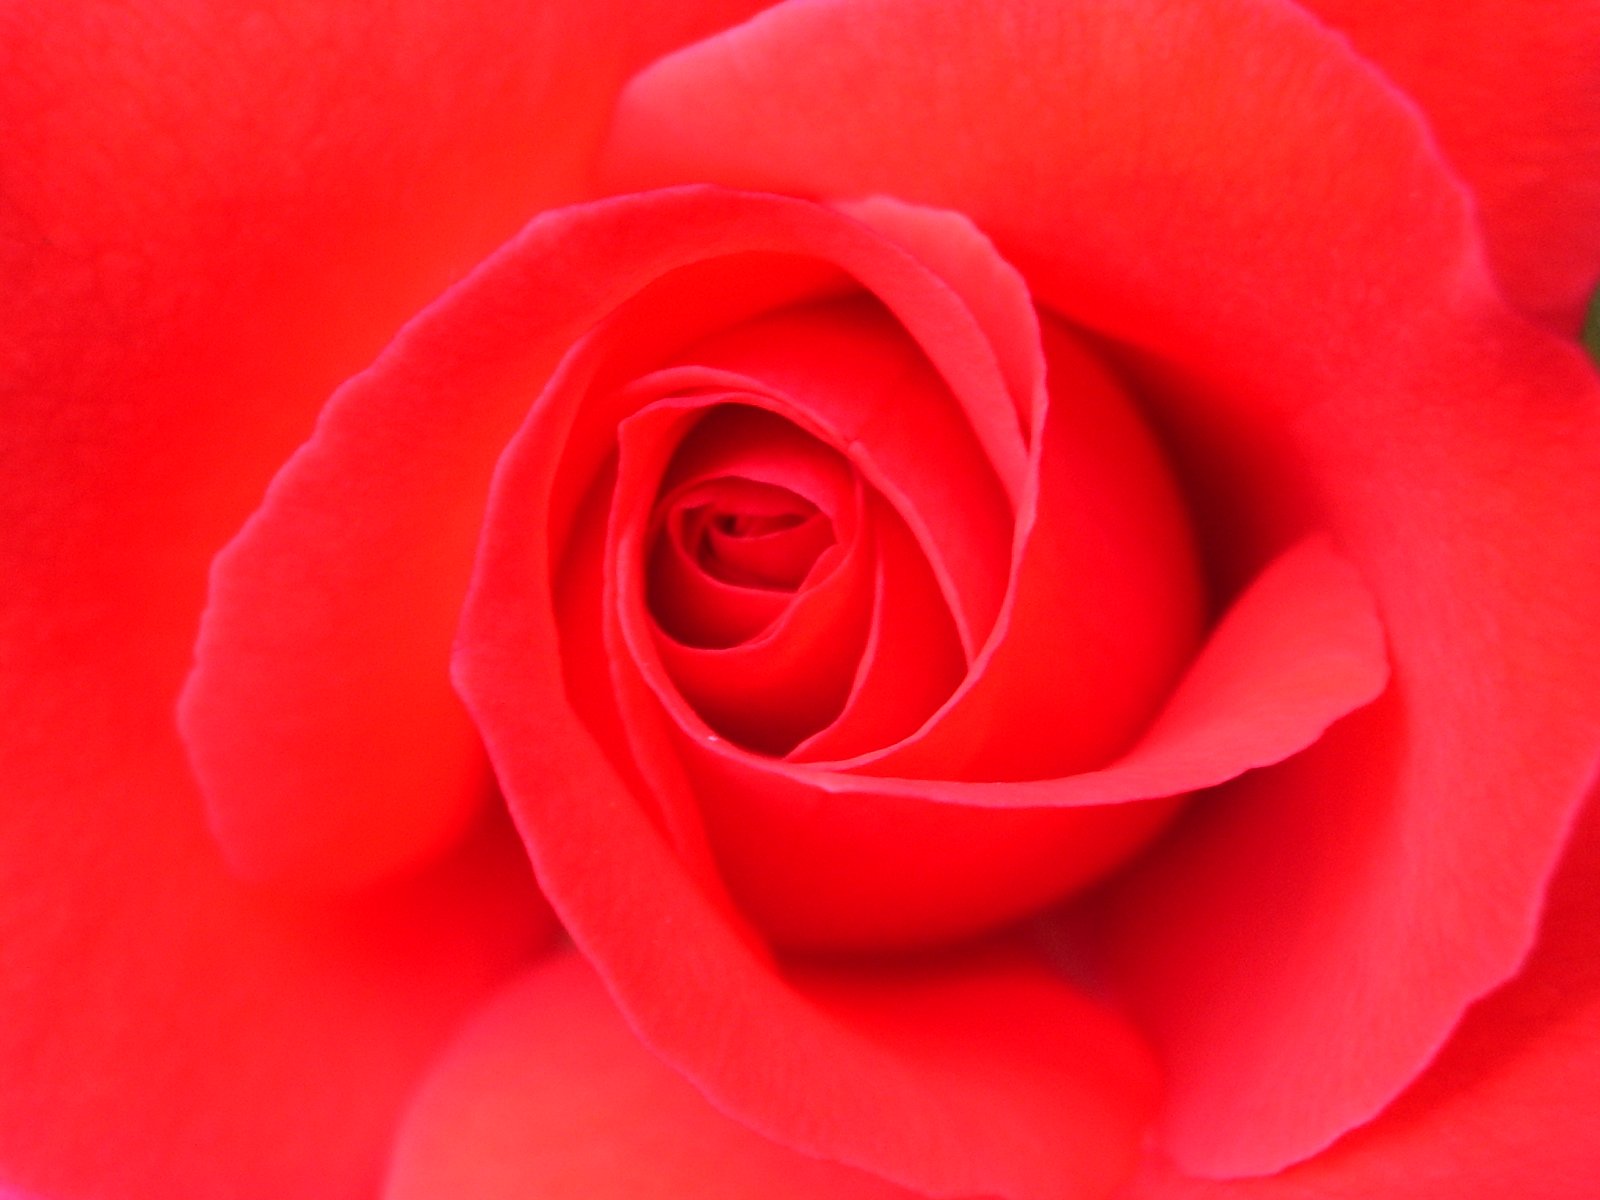 a red rose is shown in the middle of the image